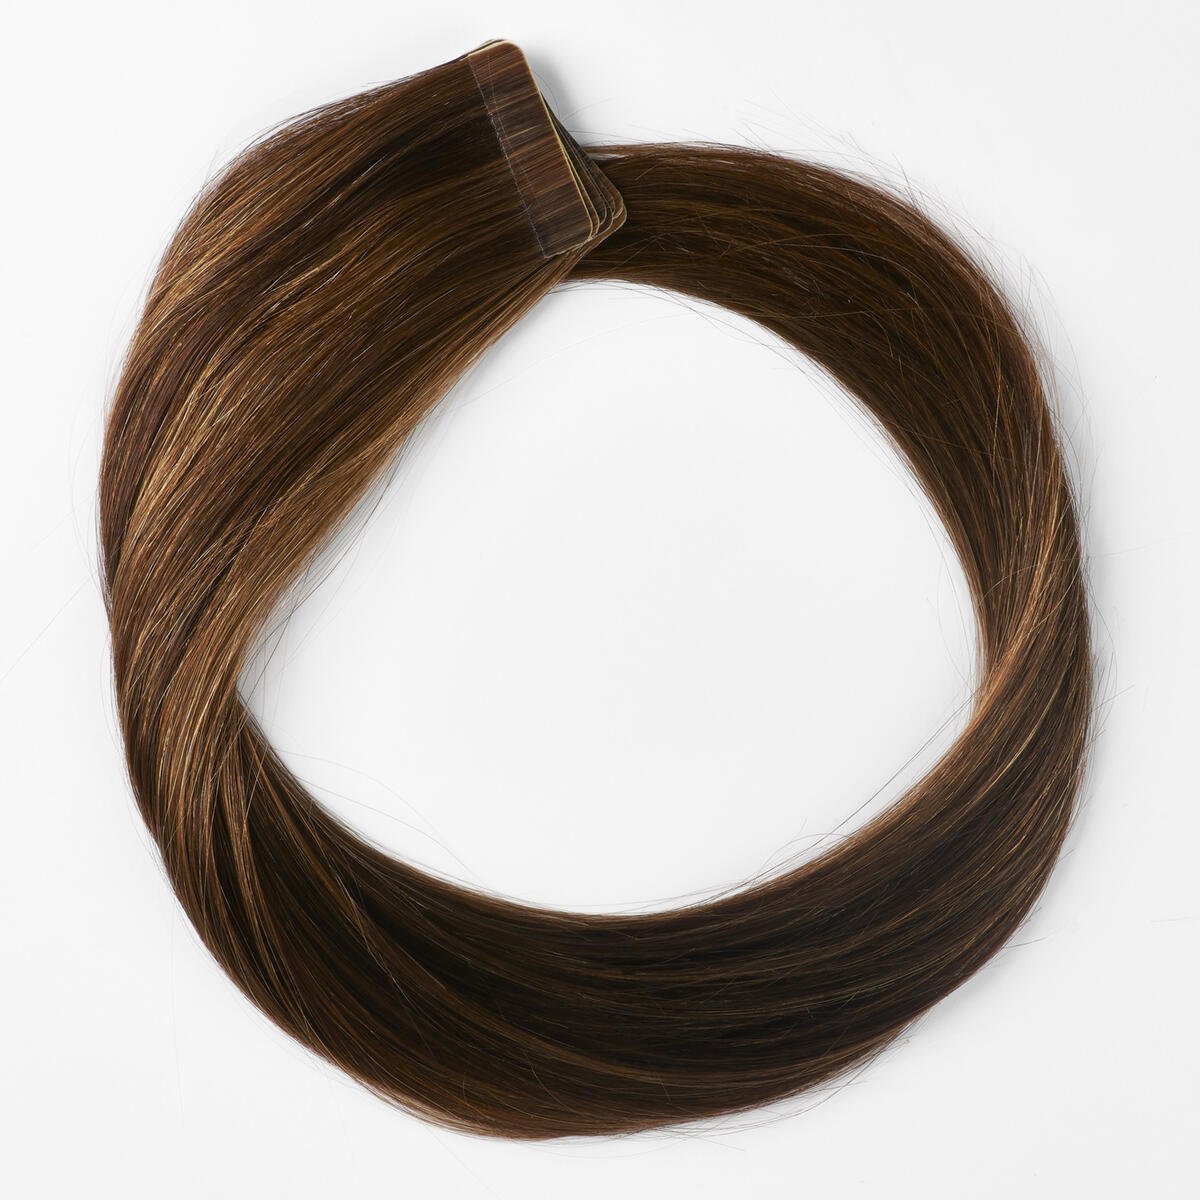 Basic Tape Extensions Classic 4 M2.3/5.0 Chocolate Mix 30 cm